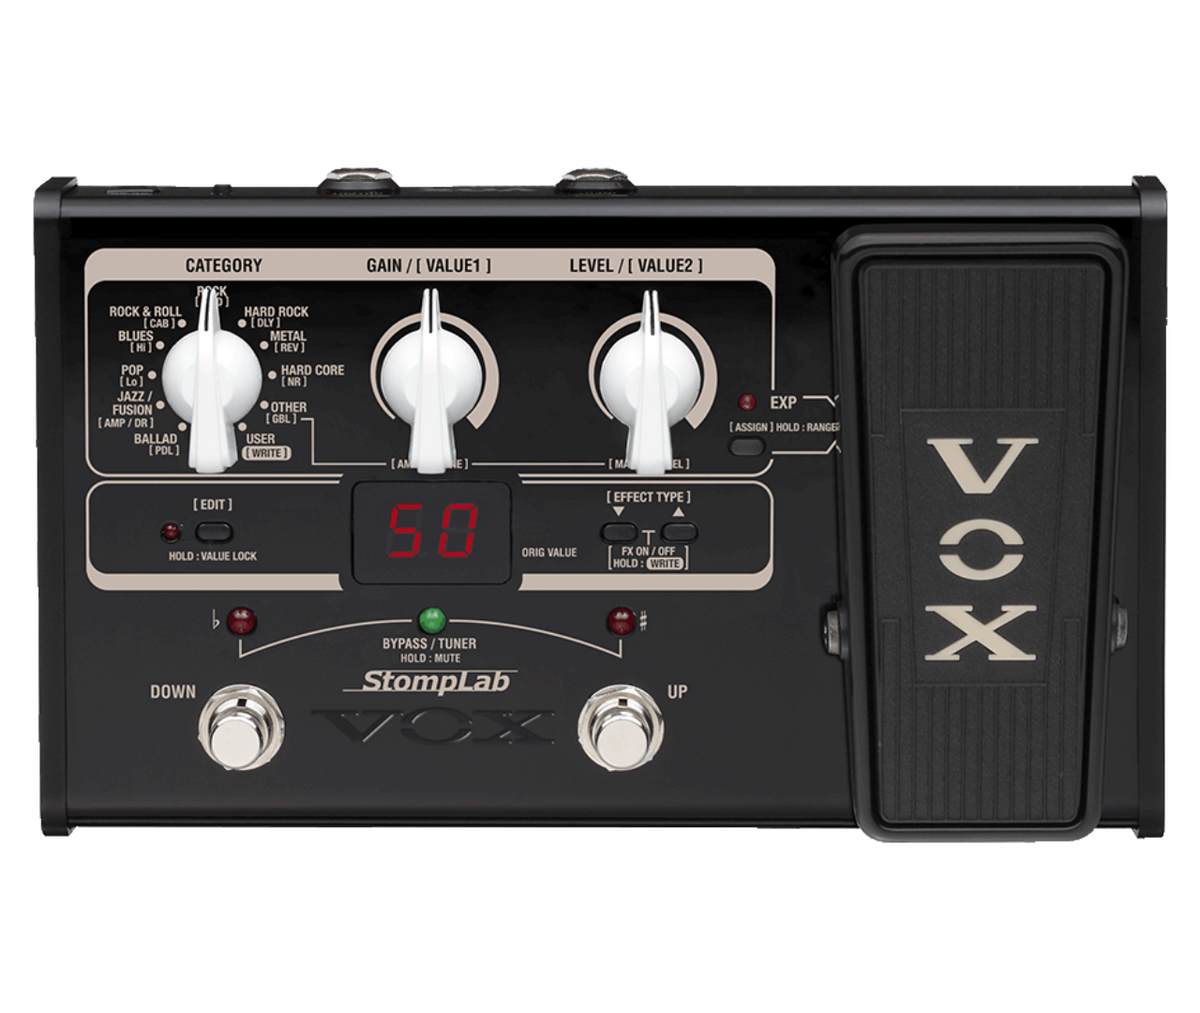 VOX Multi Effects Stomplab 2G Guitar Multi-effects Pedal with 104 Modeling Effects for Guitar, Noise Reduction, and Expression Pedal